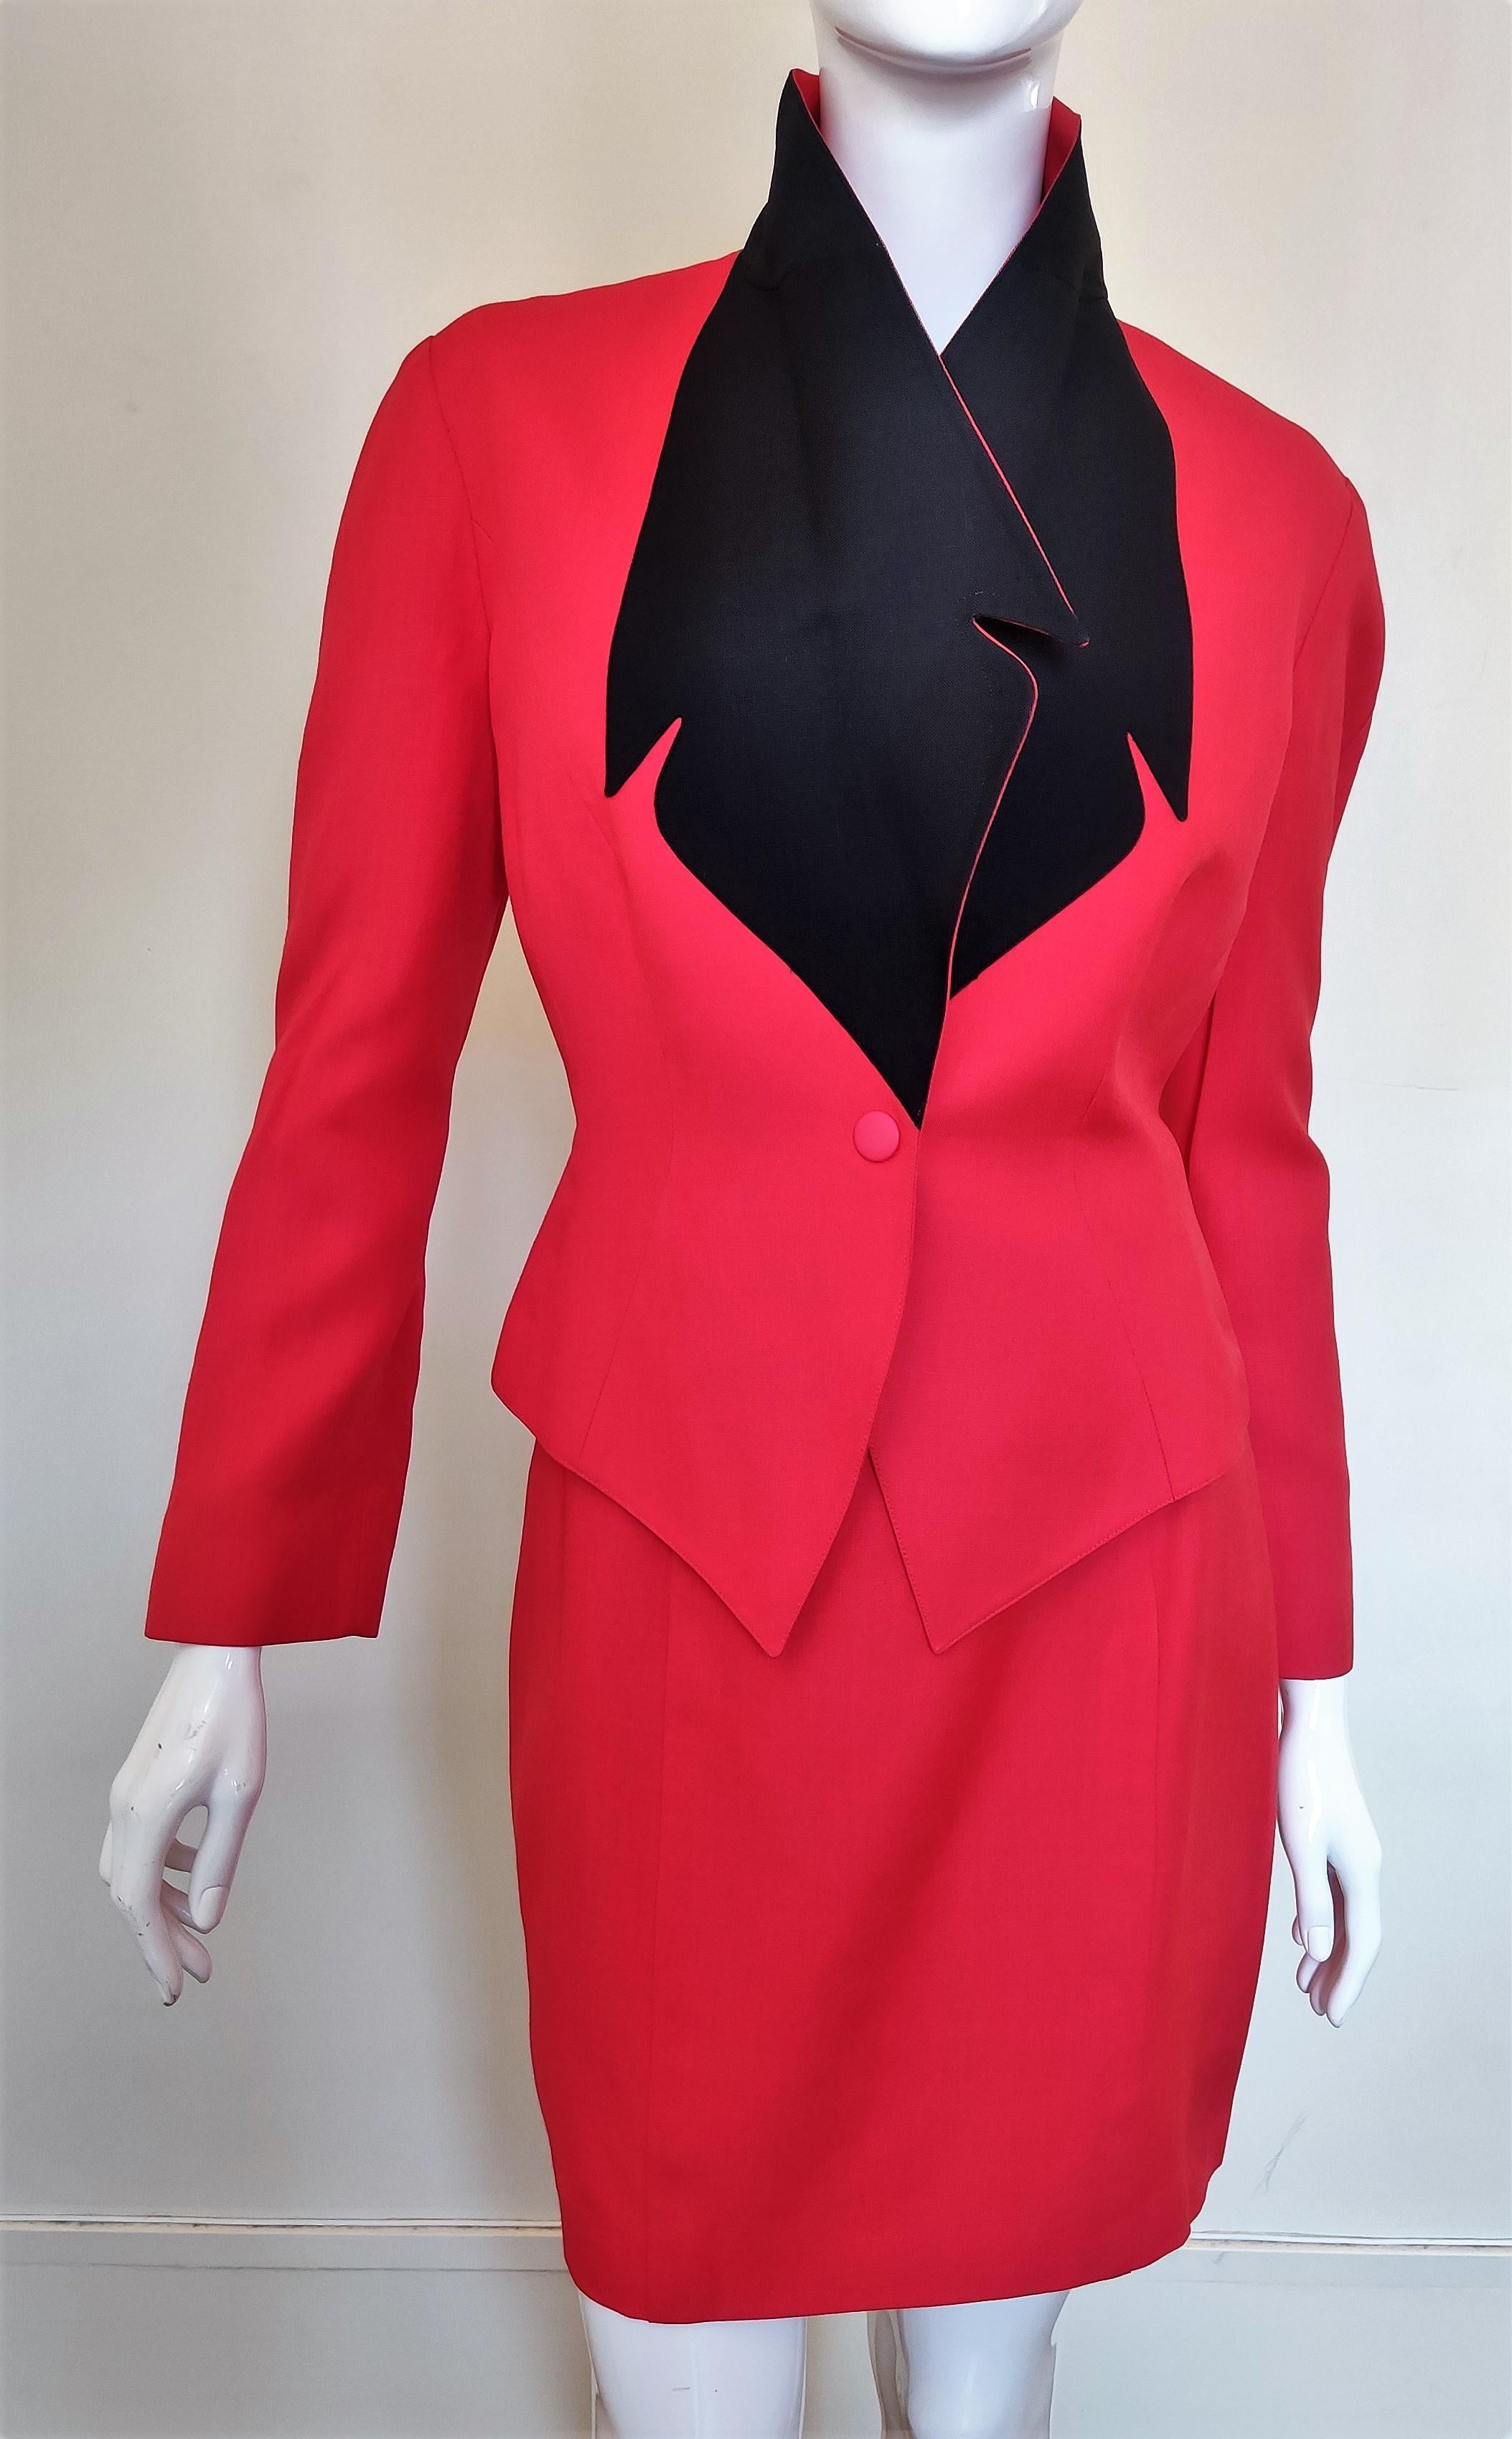 Thierry Mugler Vampire Wasp Waist Red Black Rainbow Couture Dress Ensemble Suit In Excellent Condition For Sale In PARIS, FR